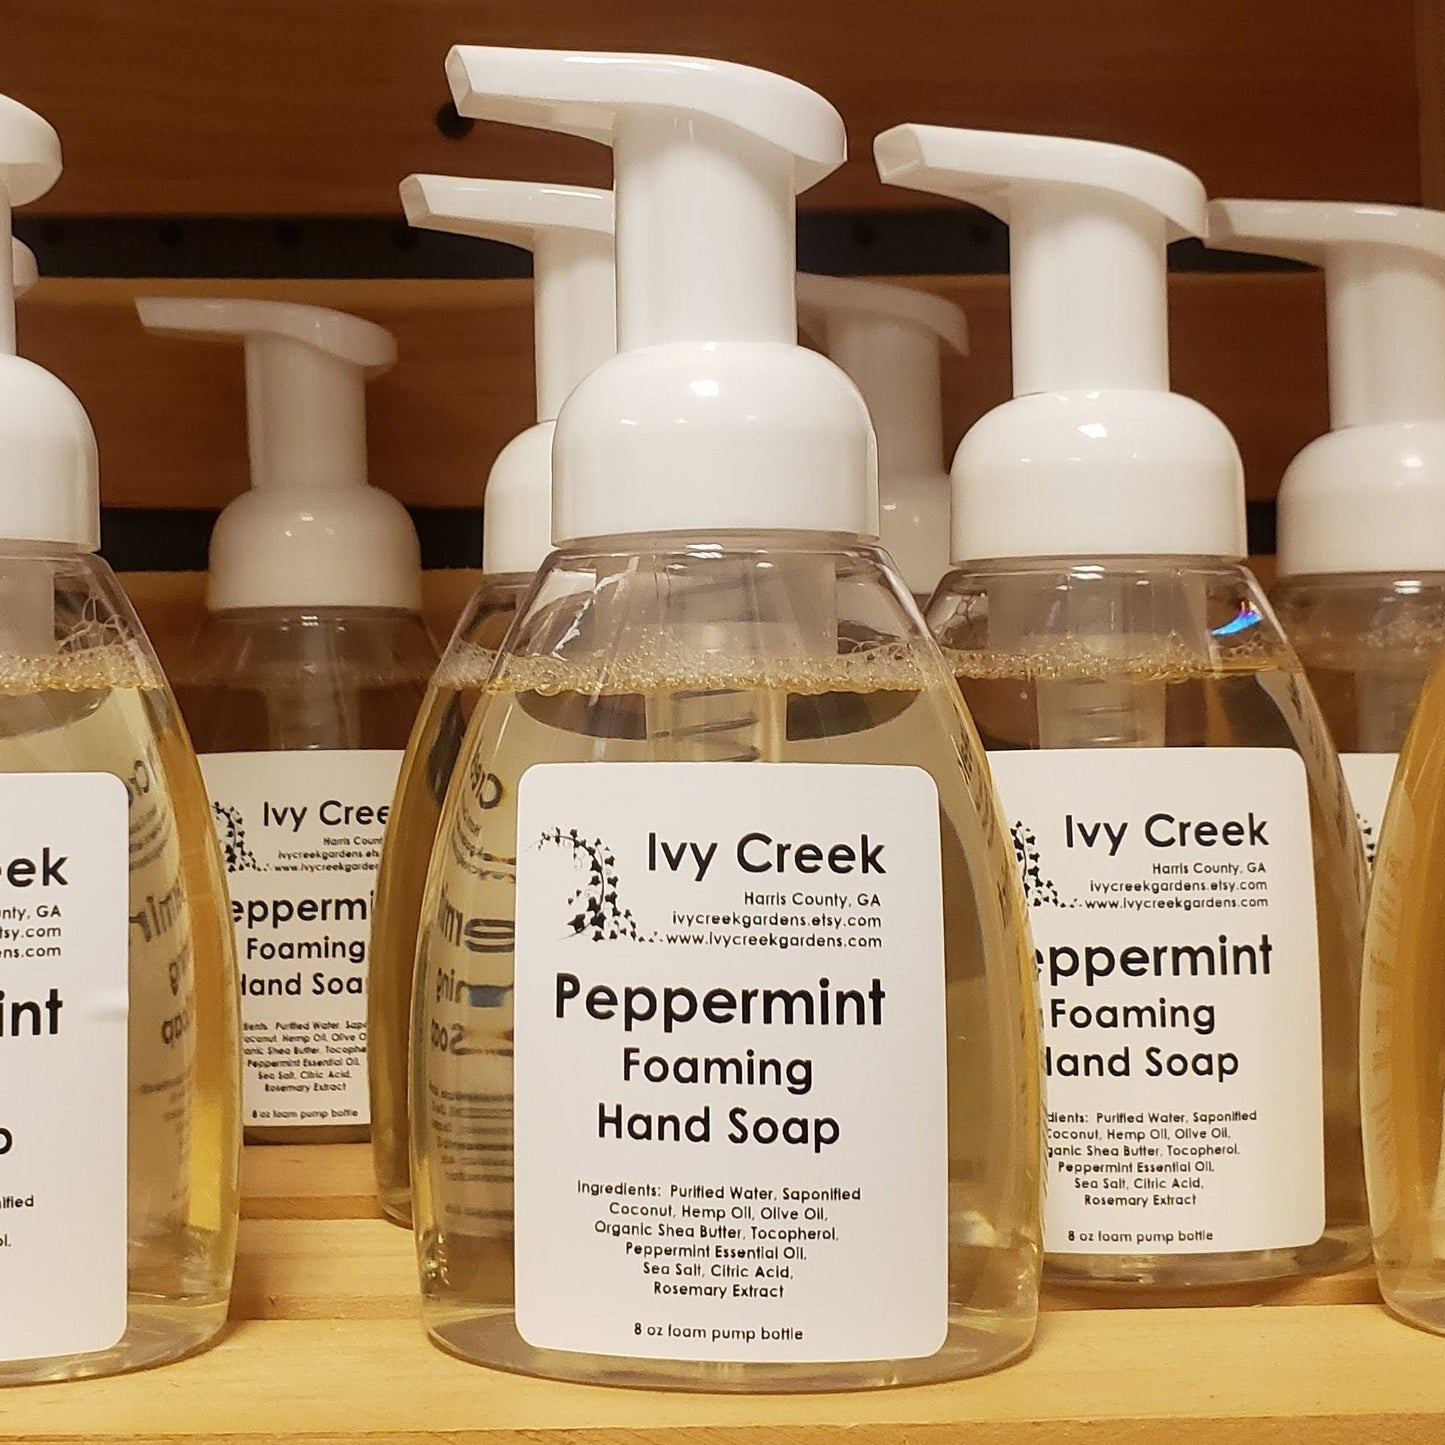 Ivy Creek Peppermint Foaming Hand Soap Refill Concentrate | Natural, Moisturizing Hand Soap | Refreshing Peppermint Scent - 20 oz refill